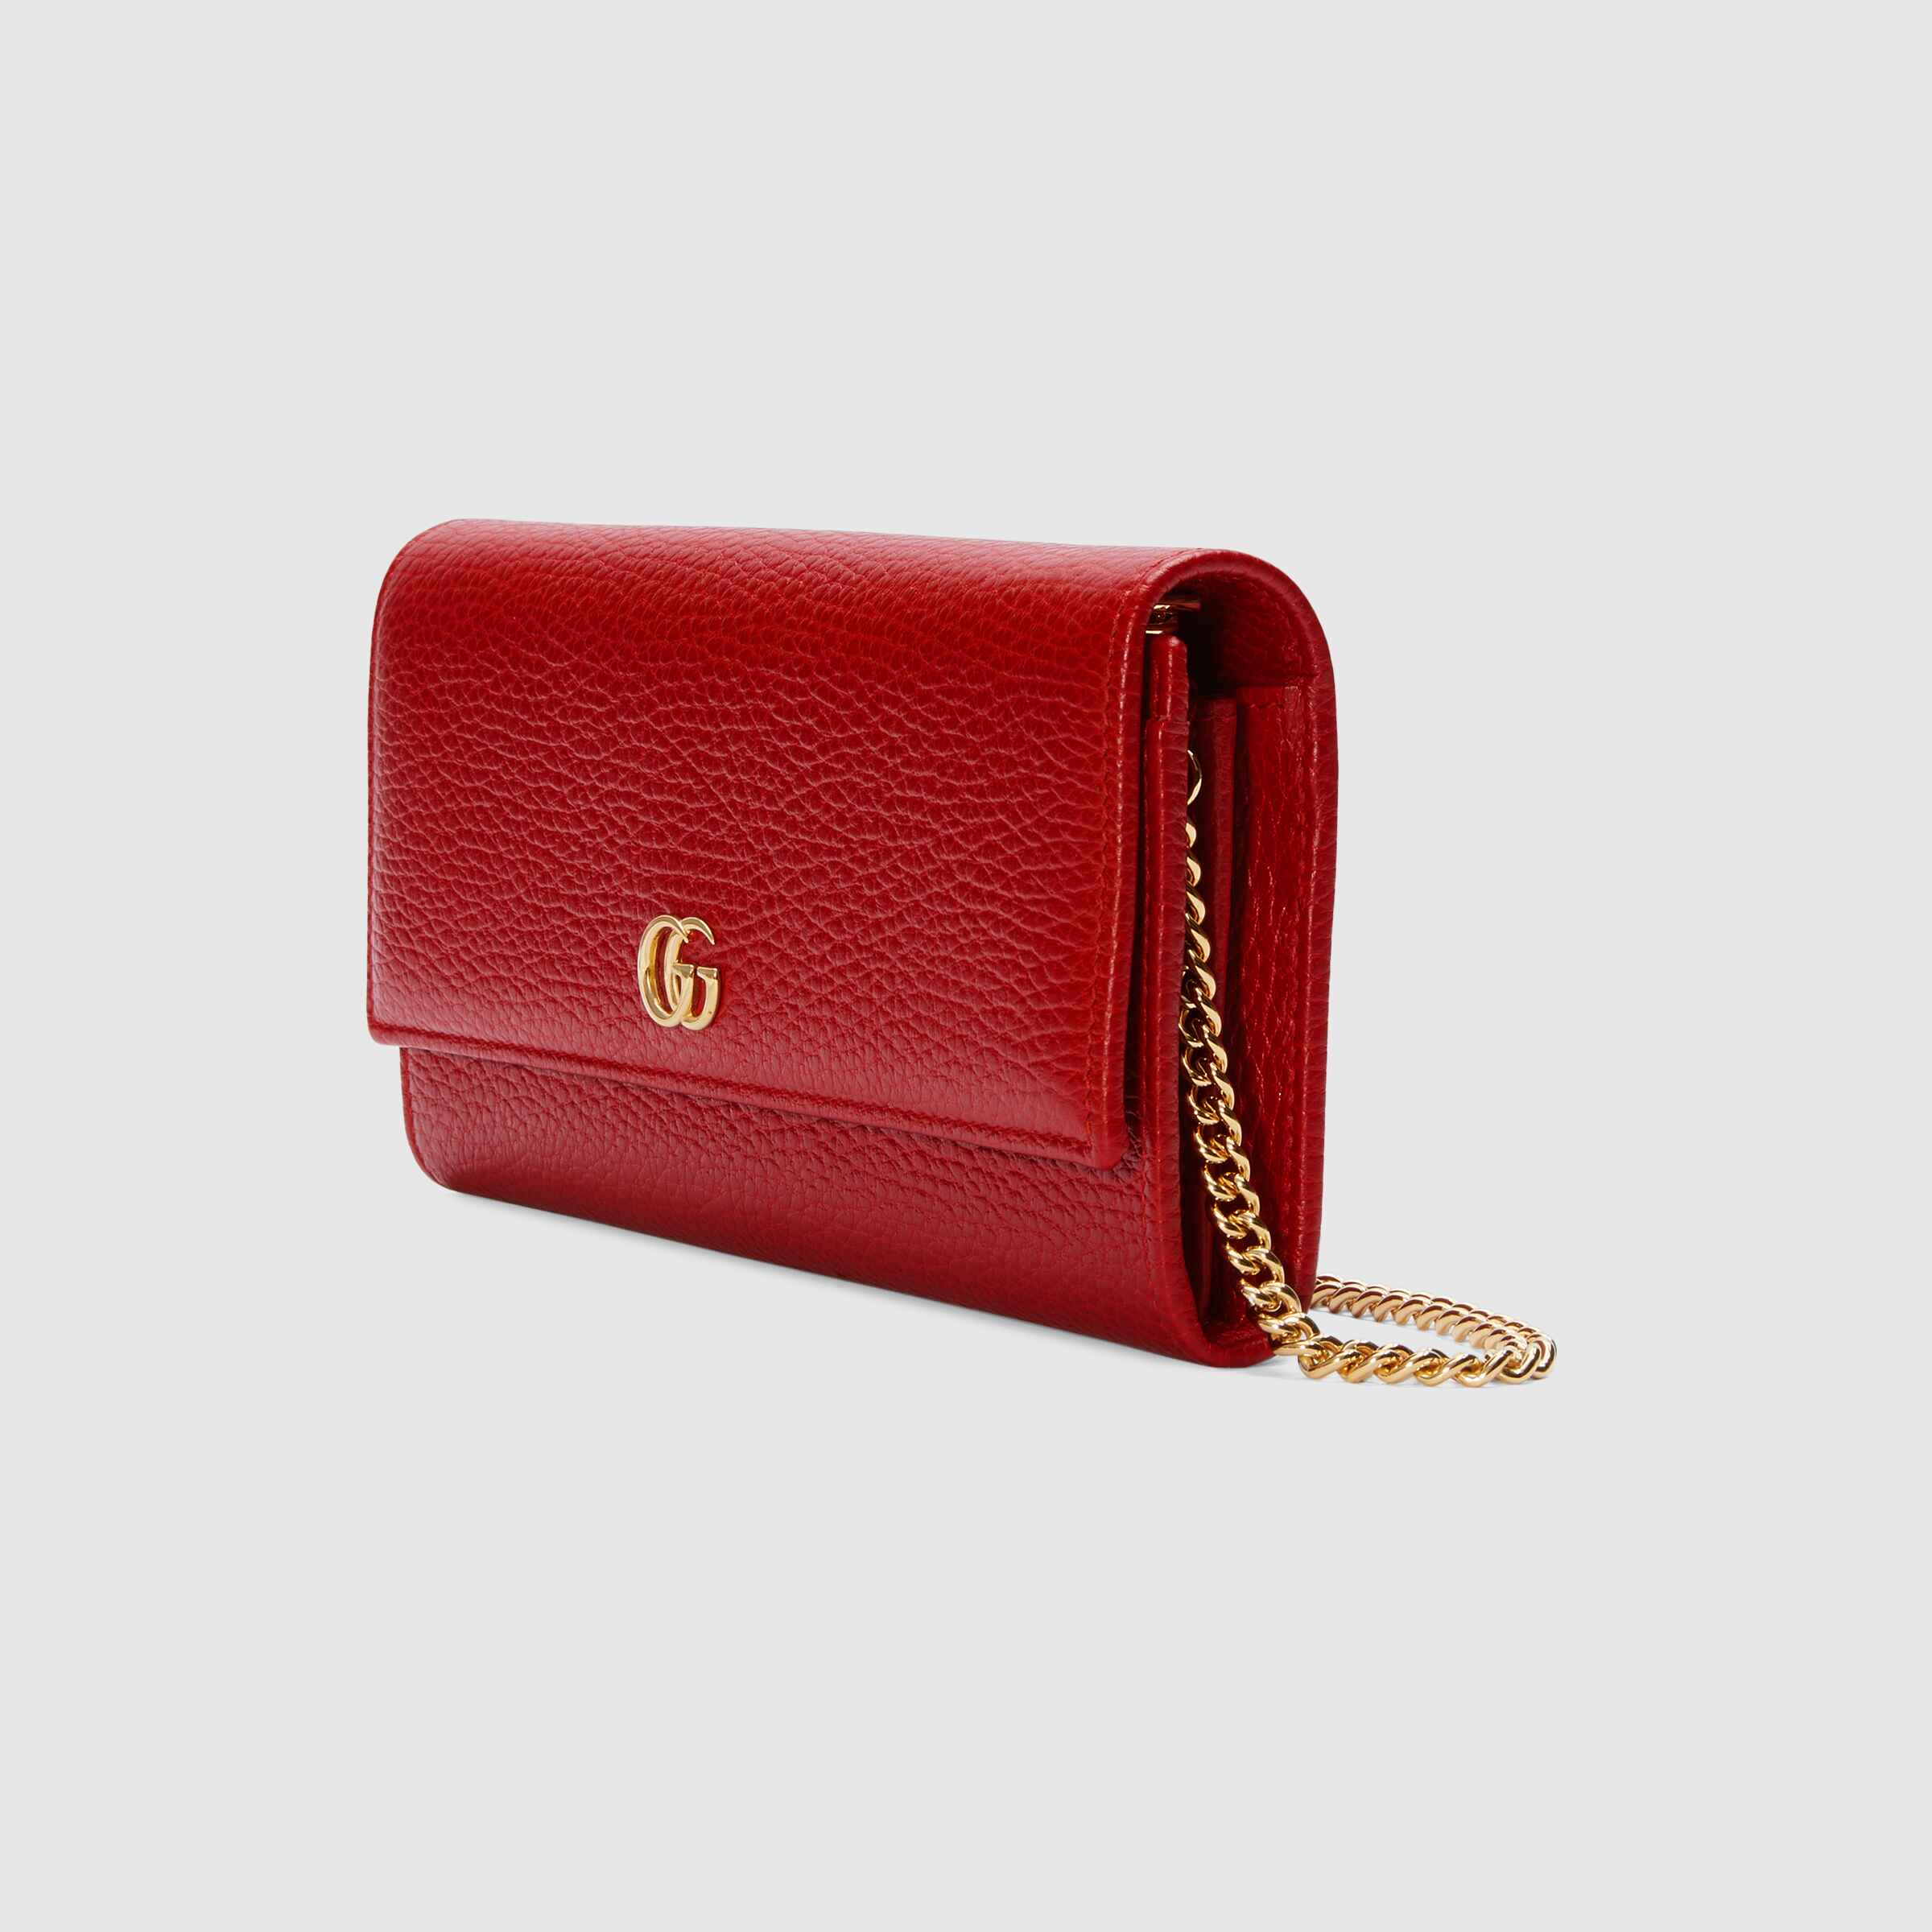 GUCCI Leather Chain Bag/Clutch Wallet Crossbody Bag/Removable Strap